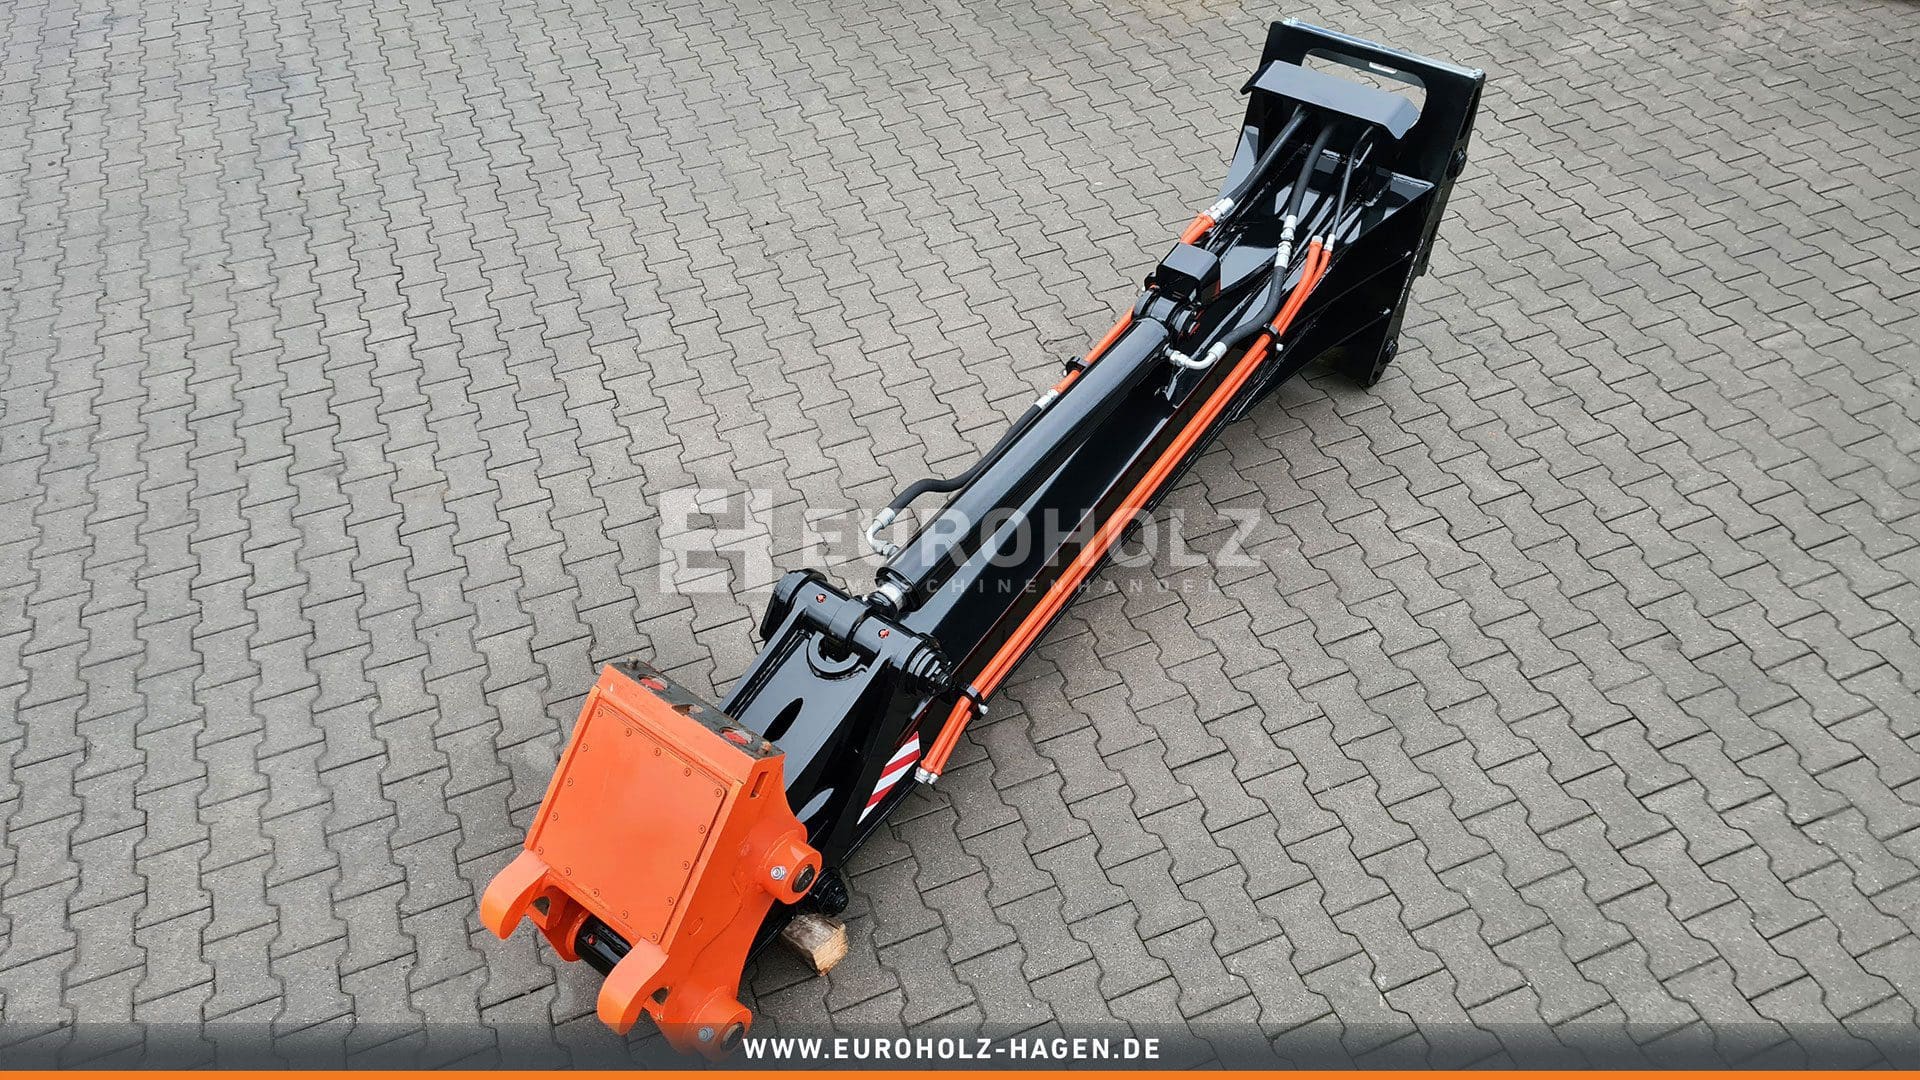 Stick extension OilQuick OQ70/55 / 3000 mm / cat. 2G / with quick coupler Lehnhoff MS10 / with extra hydraulic lines